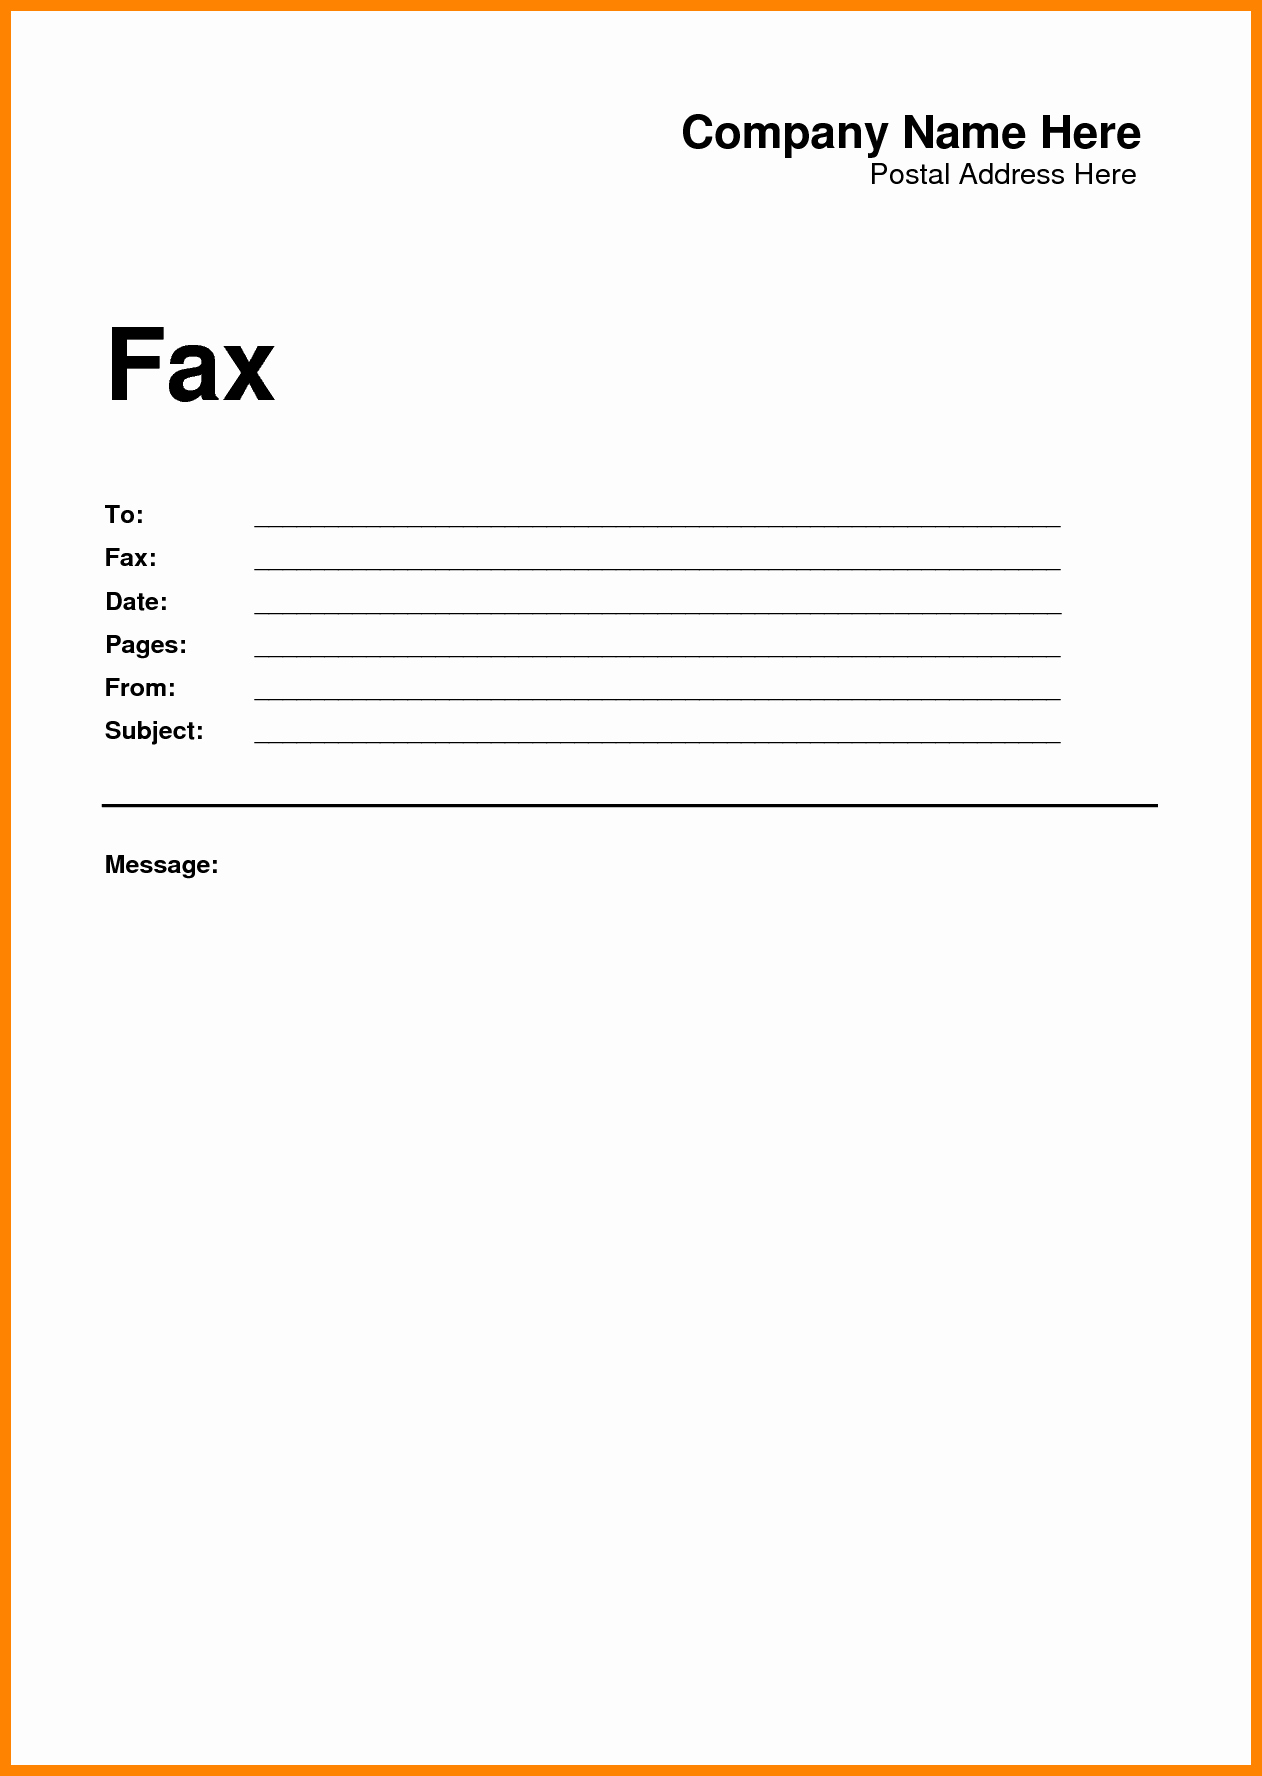 Fillable Fax Cover Sheet Template Fresh 6 Free Fax Cover Sheet